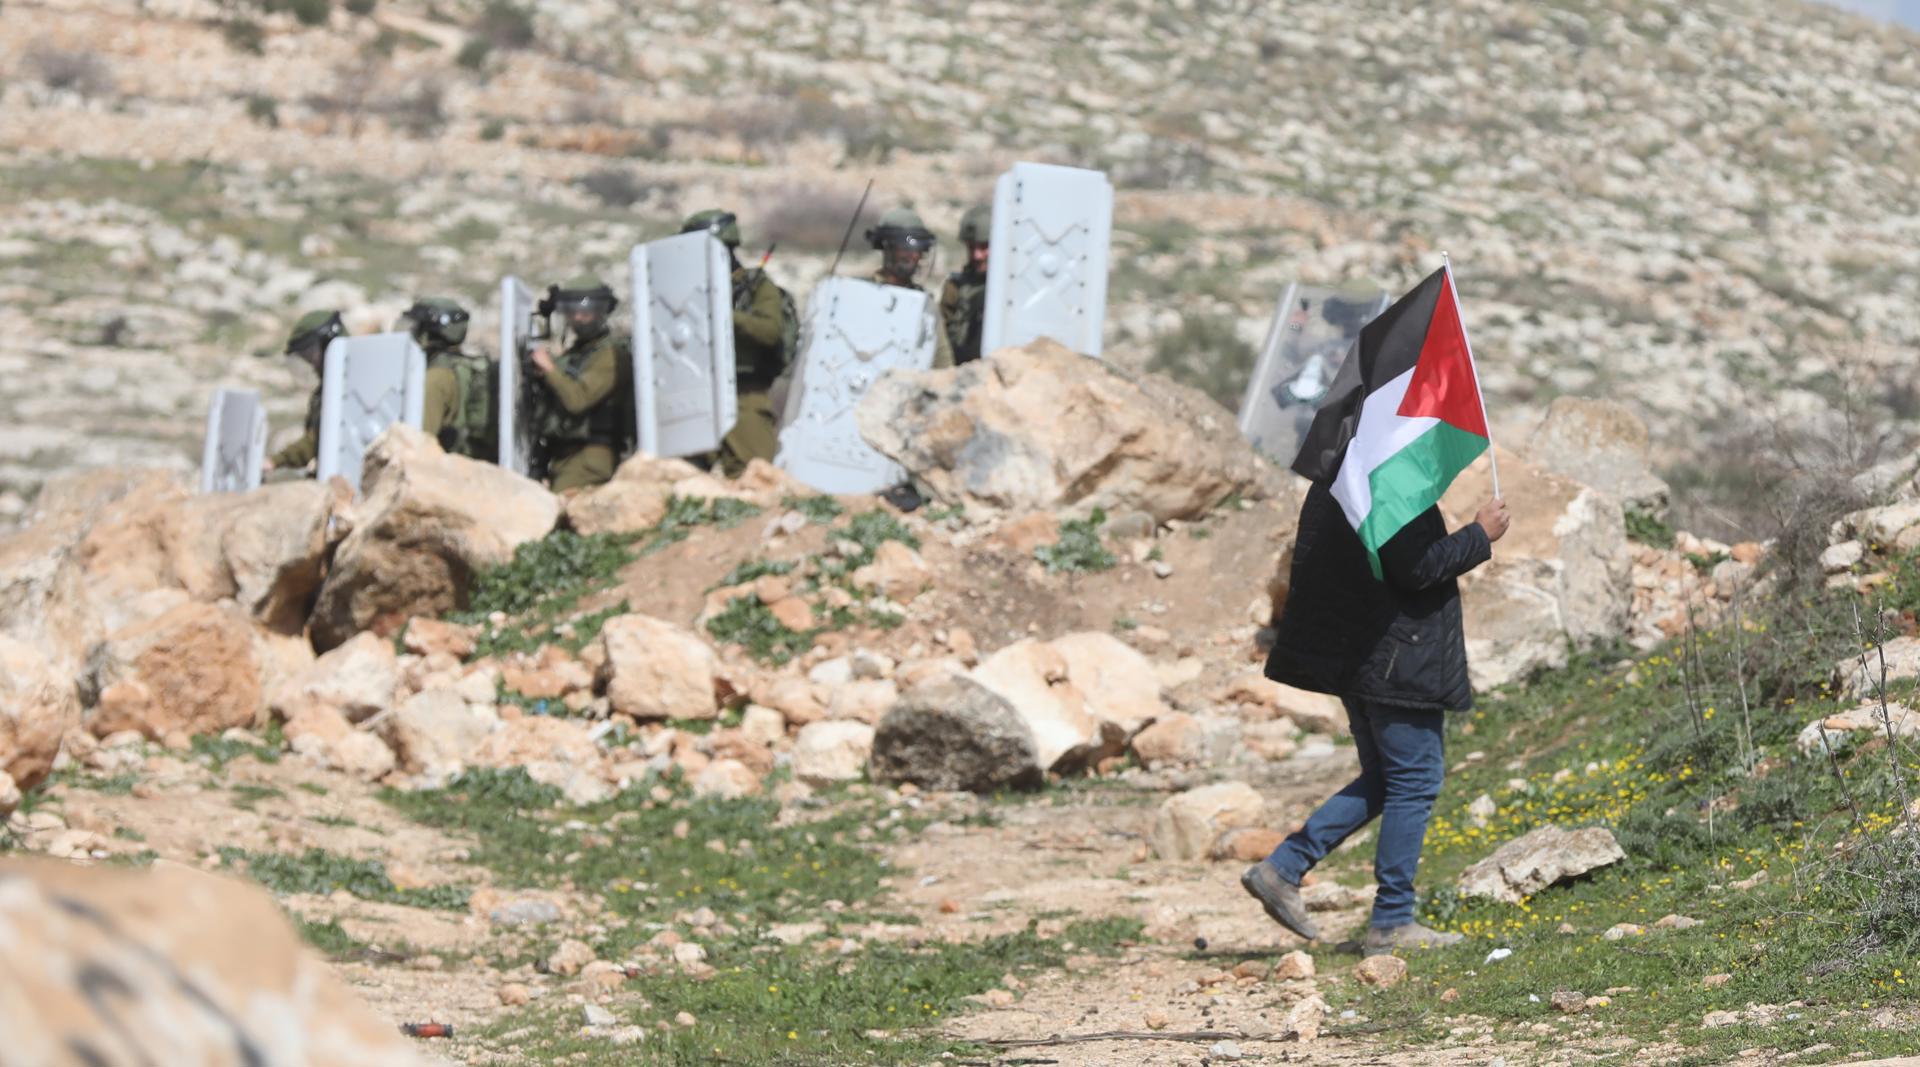 A Palestinian waves a Palestine flag during clashes with Israeli soldiers after a protest at Bet Dajan village near the West Bank city of Nablus, 24 February 2023. EFE-EPA FILE/ALAA BADARNEH